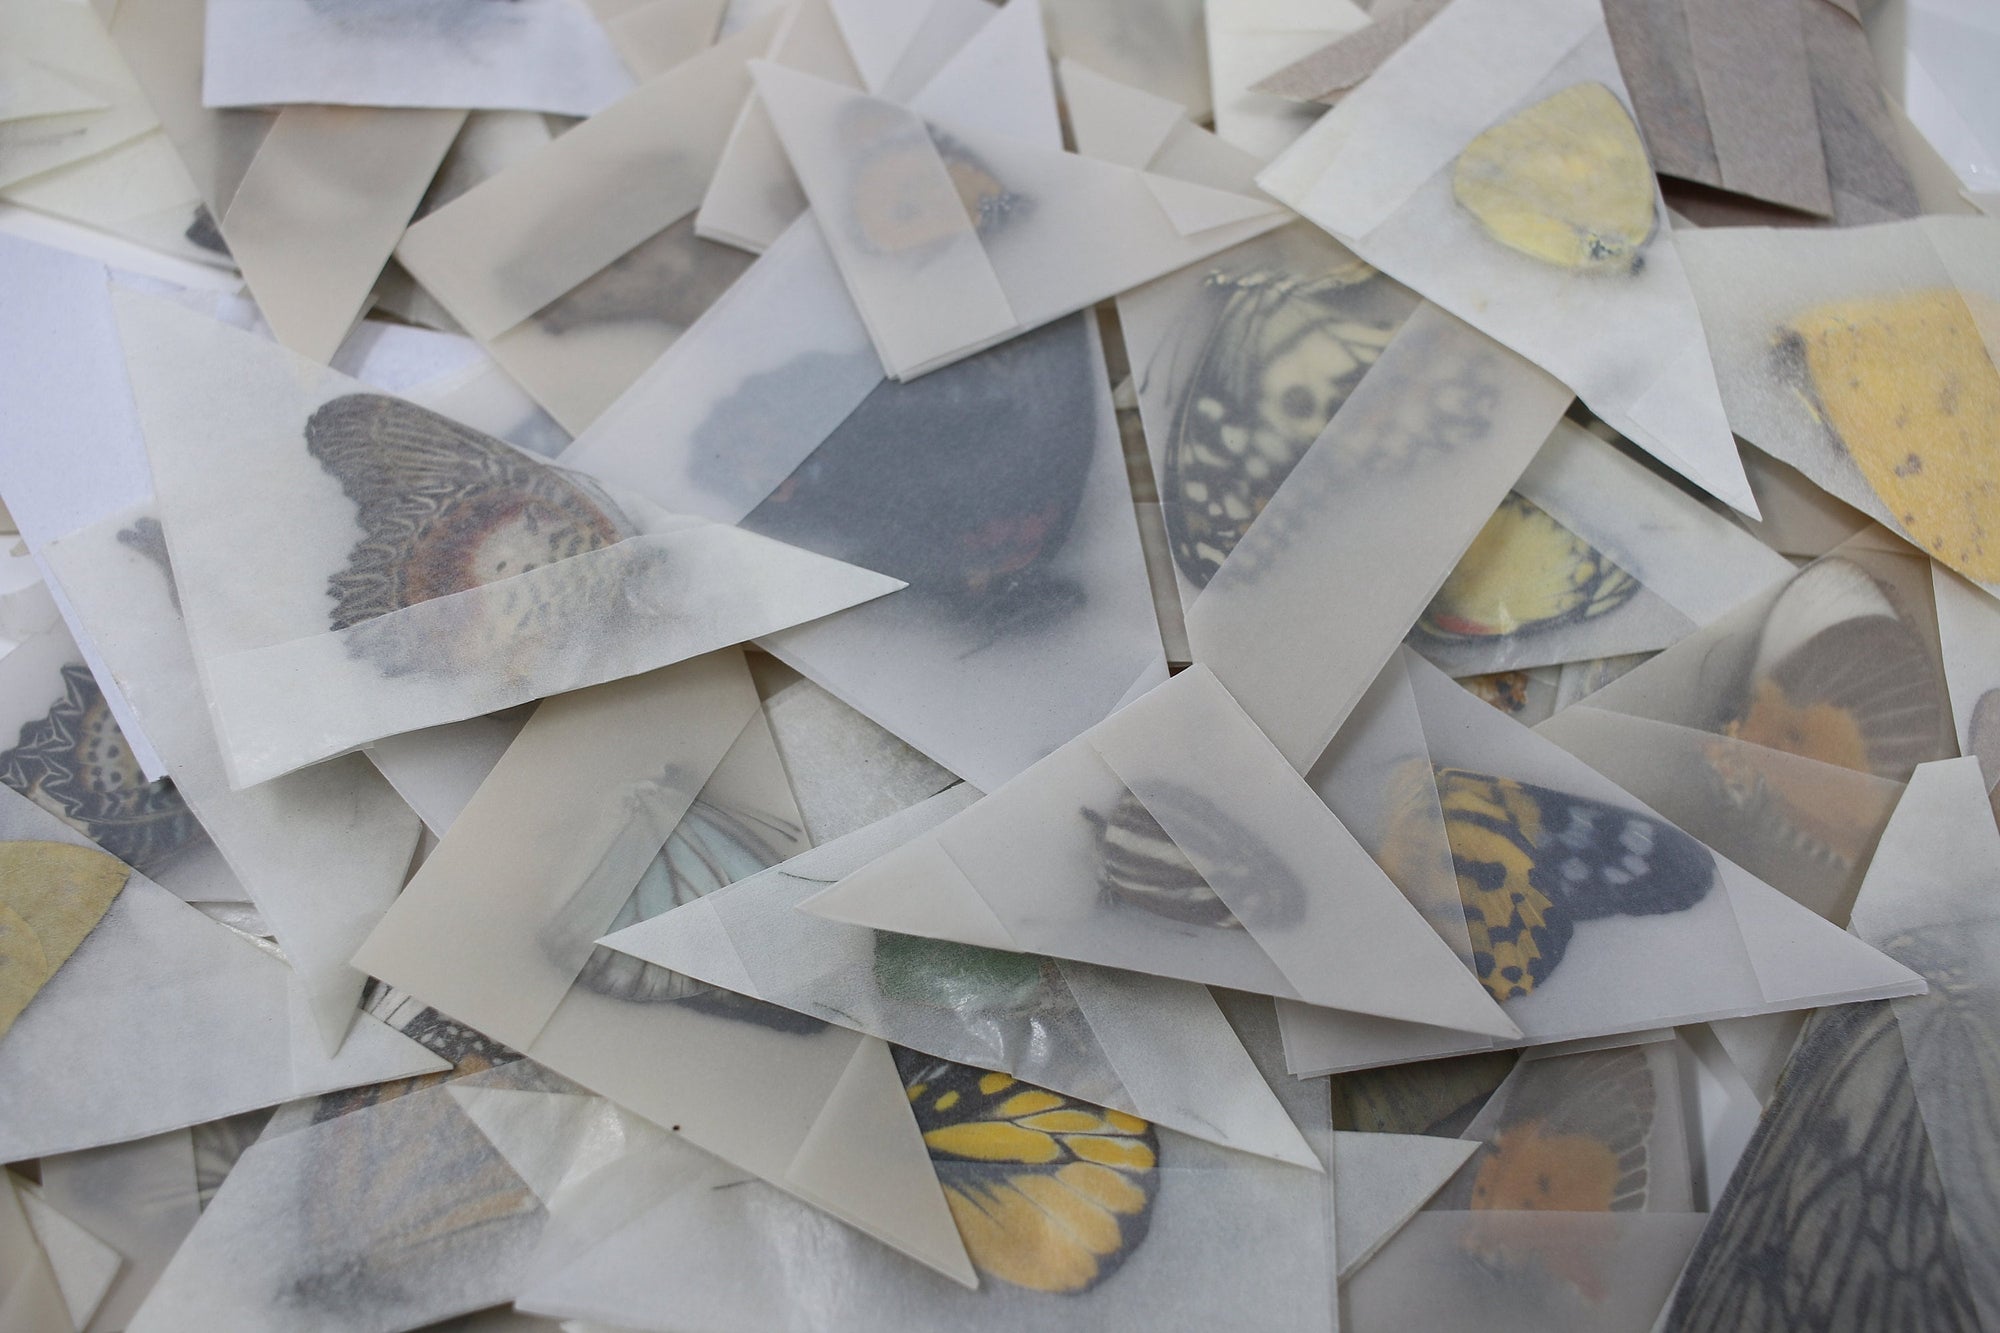 50 'Second Grade A2' Real Dry Butterflies | Imperfect or Damaged | Assorted Unmounted Worldwide Butterfly Specimens WHOLESALE